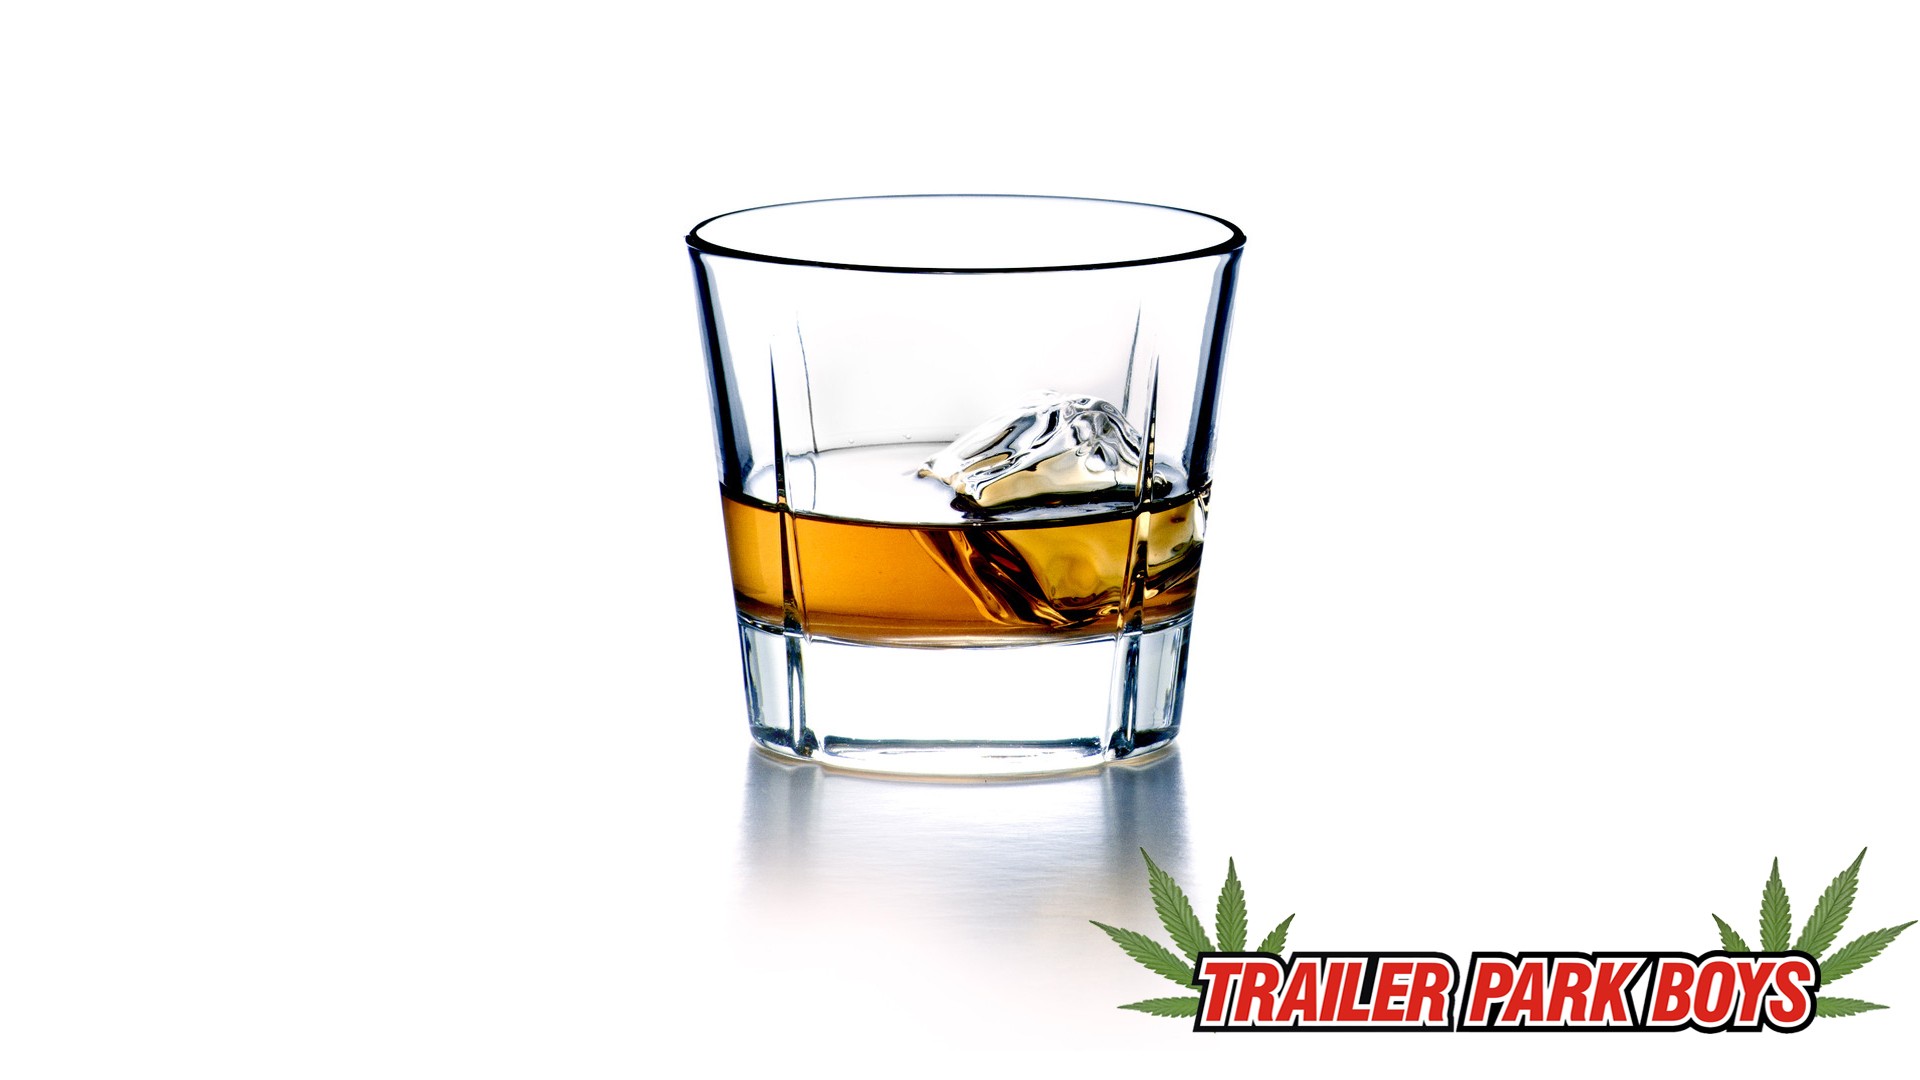 General 1920x1080 drink trailer park boys drinking glass ice cubes alcohol simple background